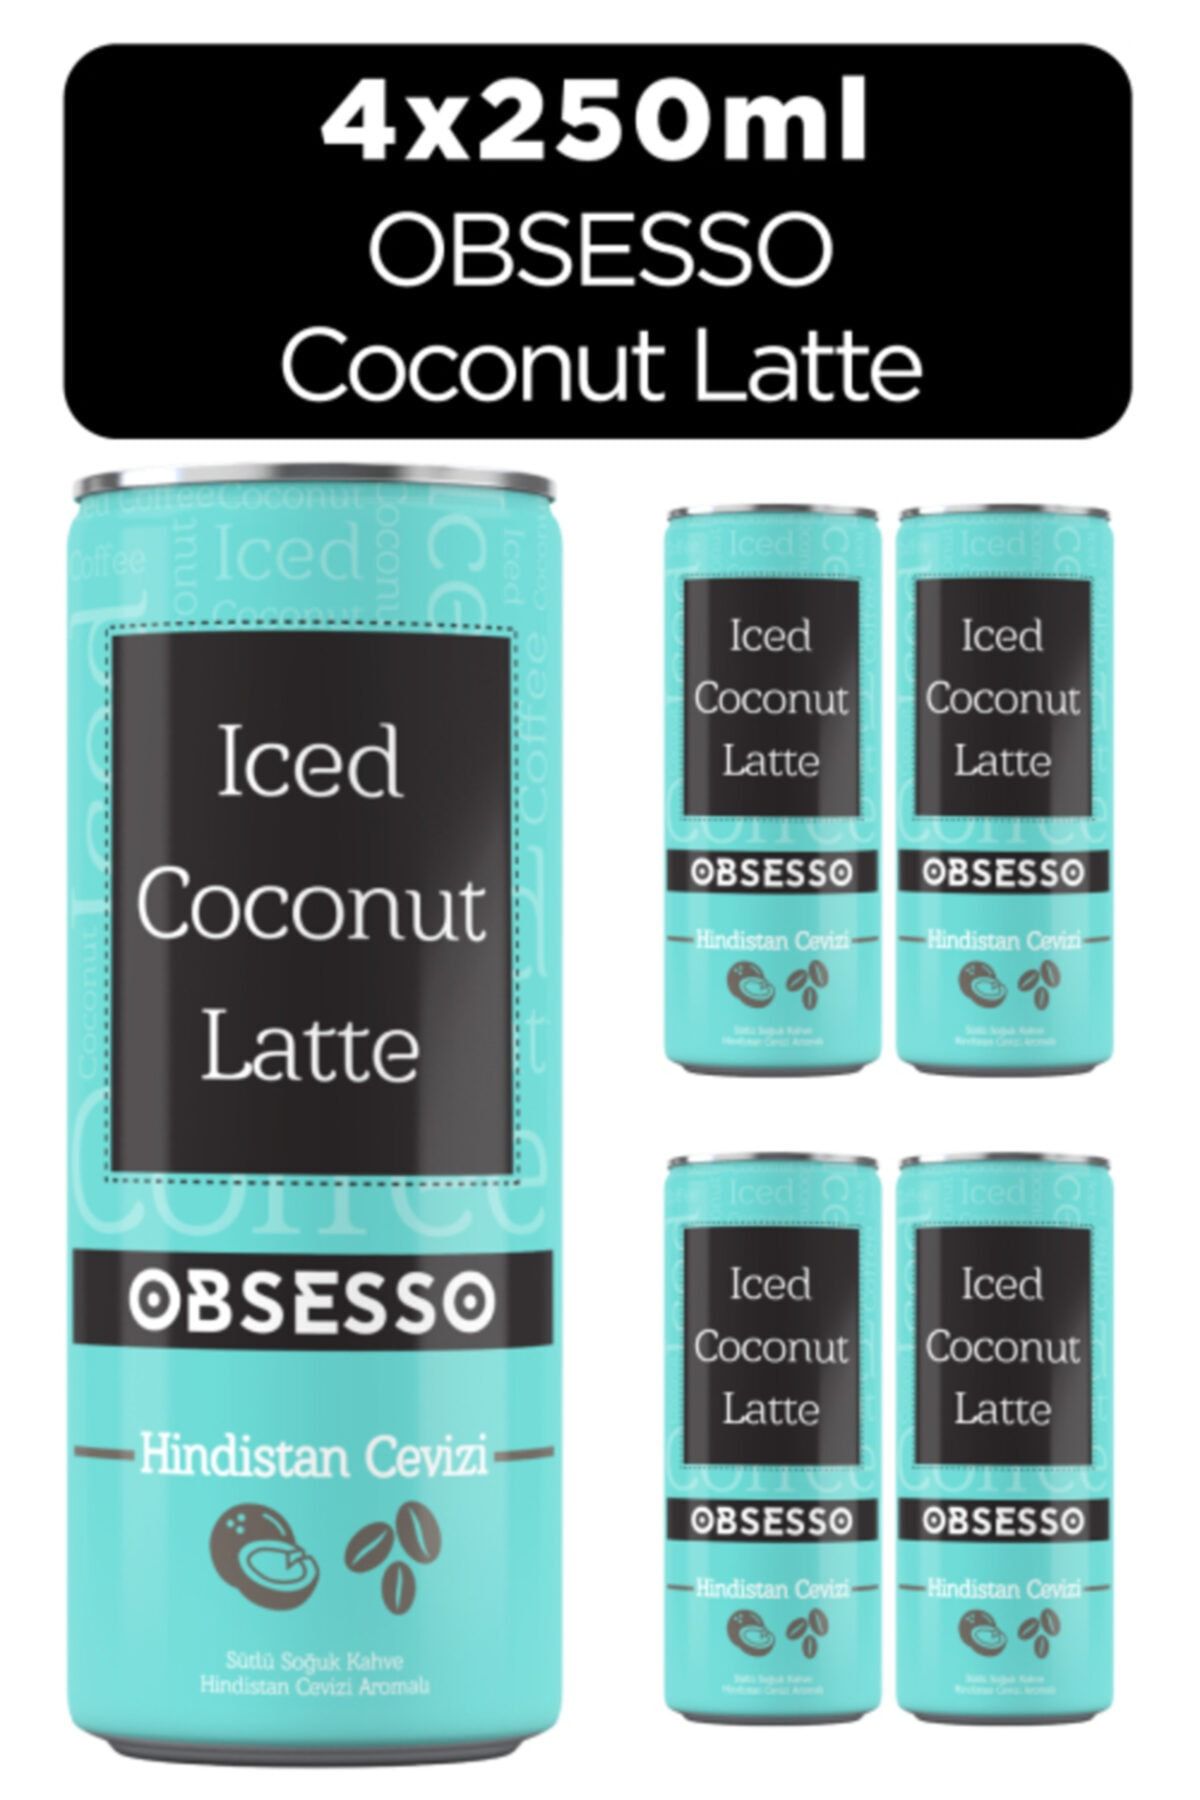 OBSESSO Iced Coconut Latte  250ml X 4 Ad.